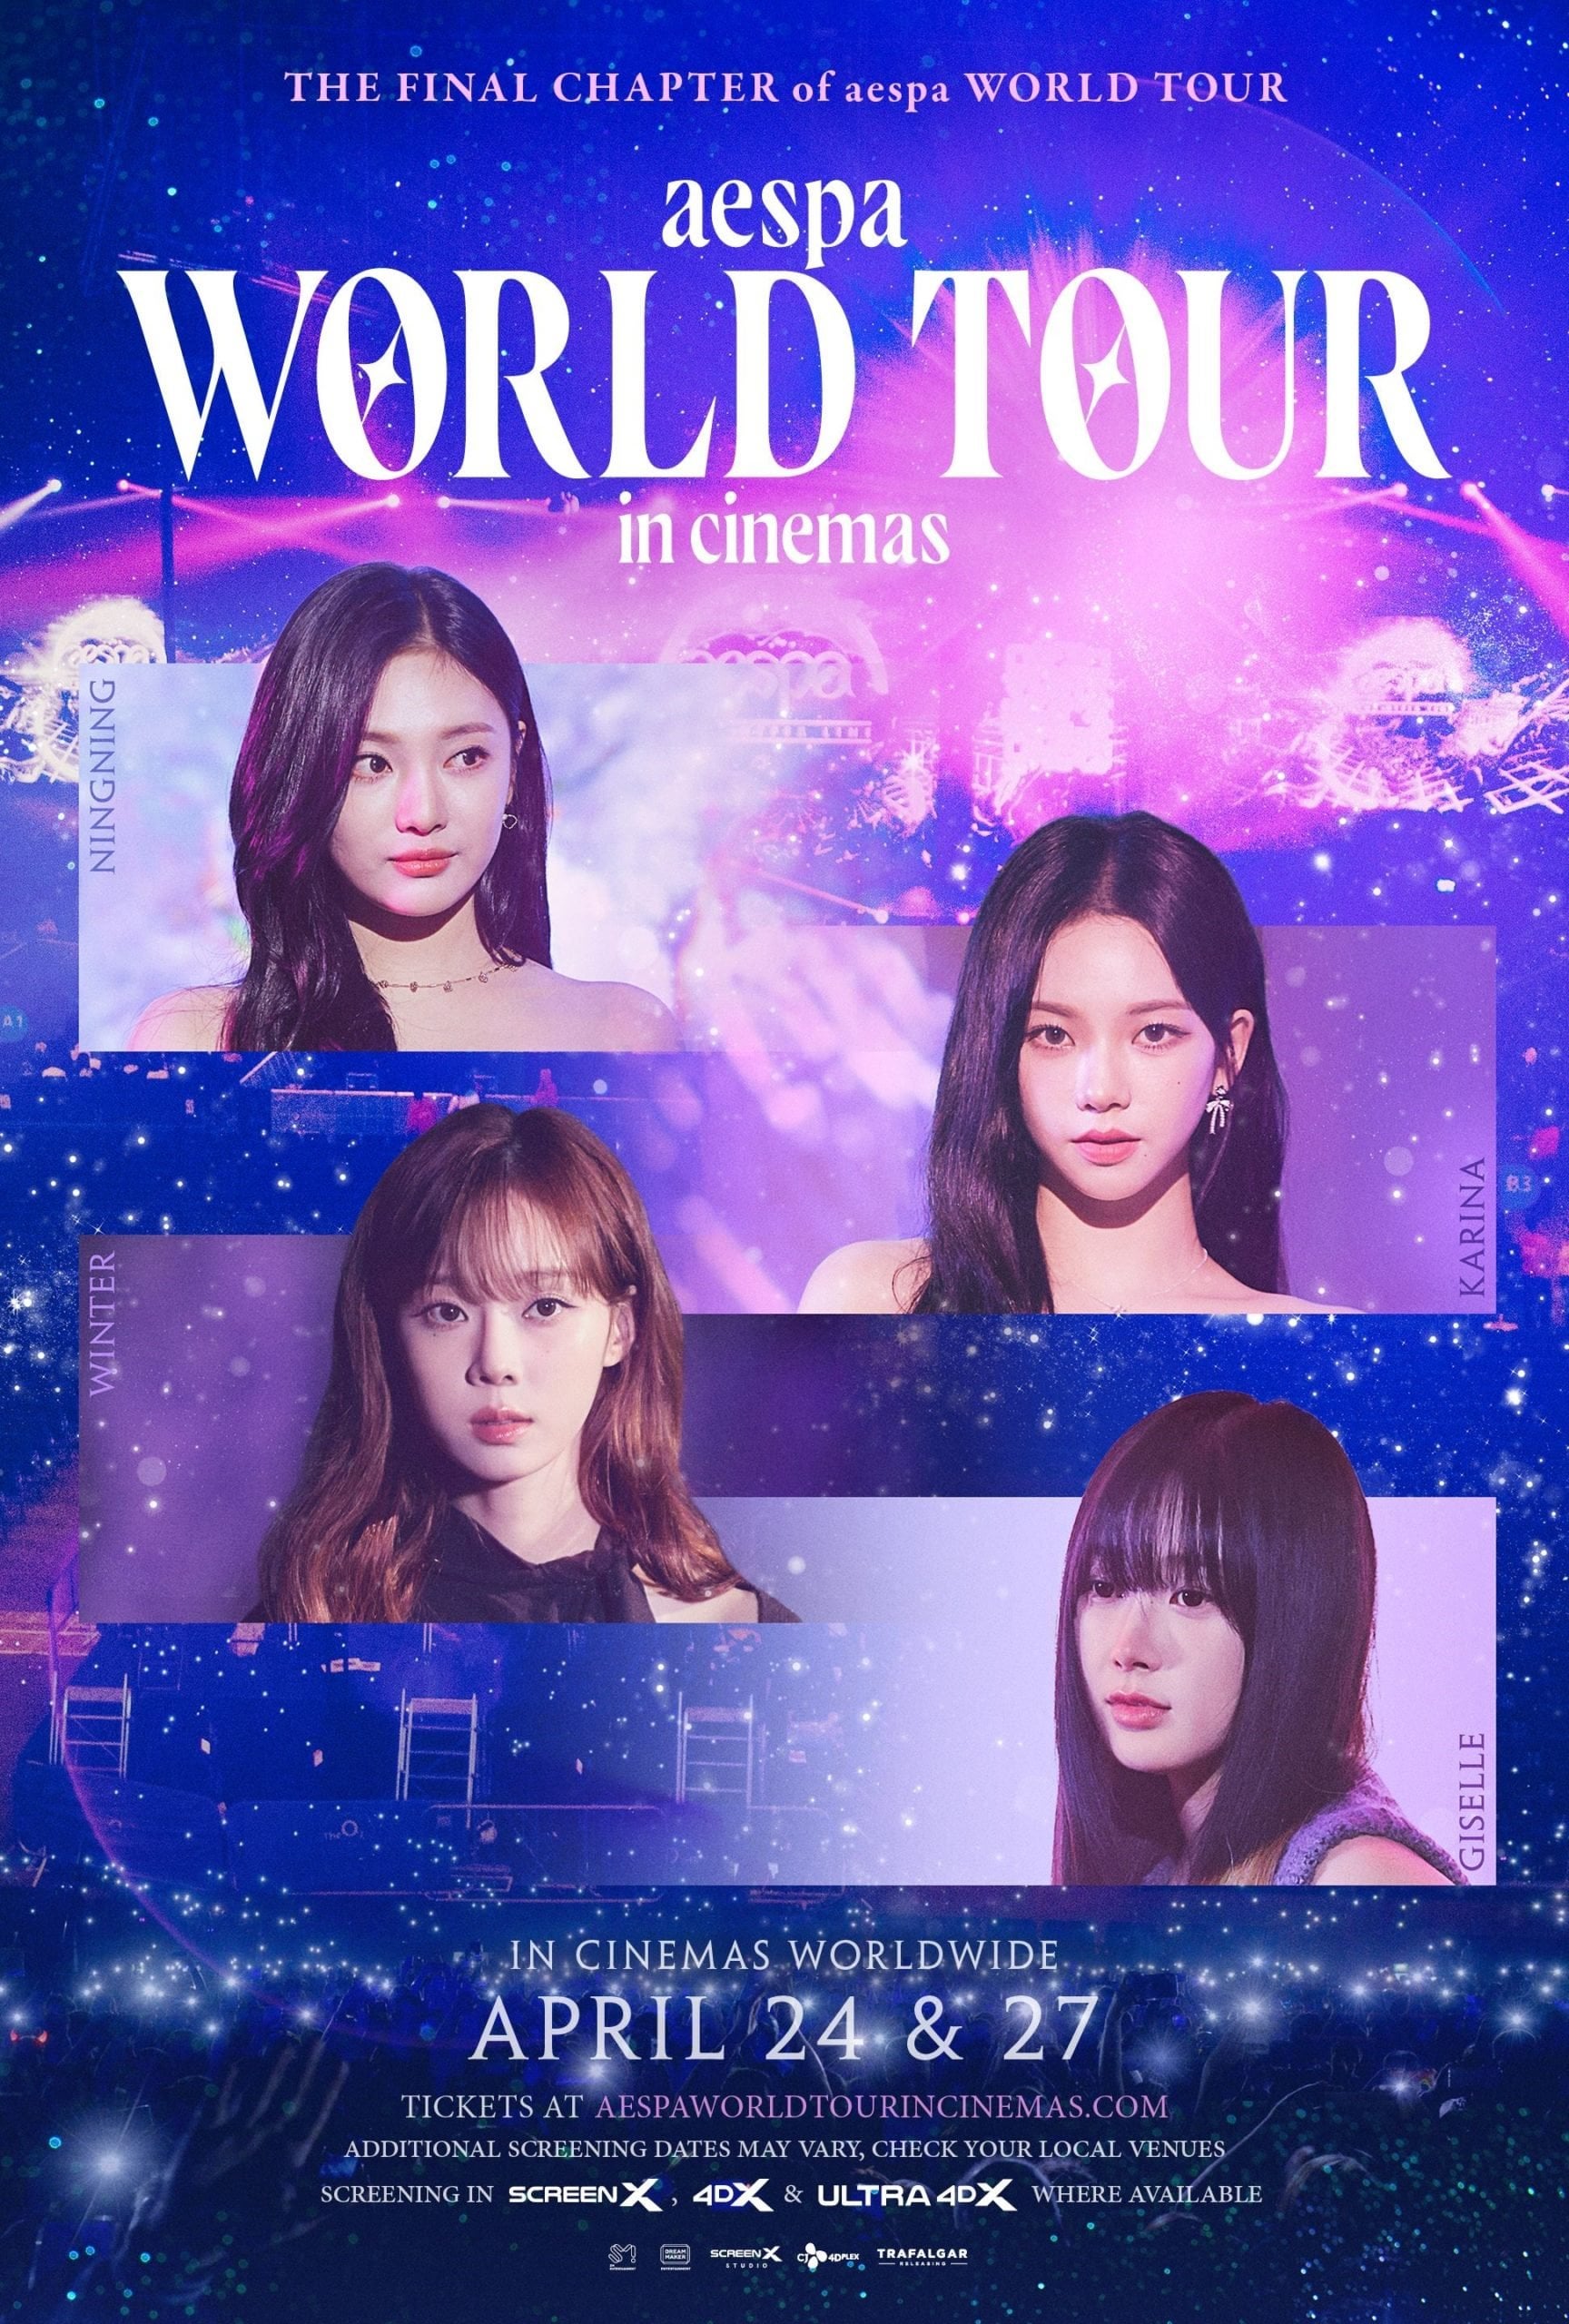 K-pop's 'aespa: WORLD TOUR in cinemas' to be released worldwide on 24 & 27 April